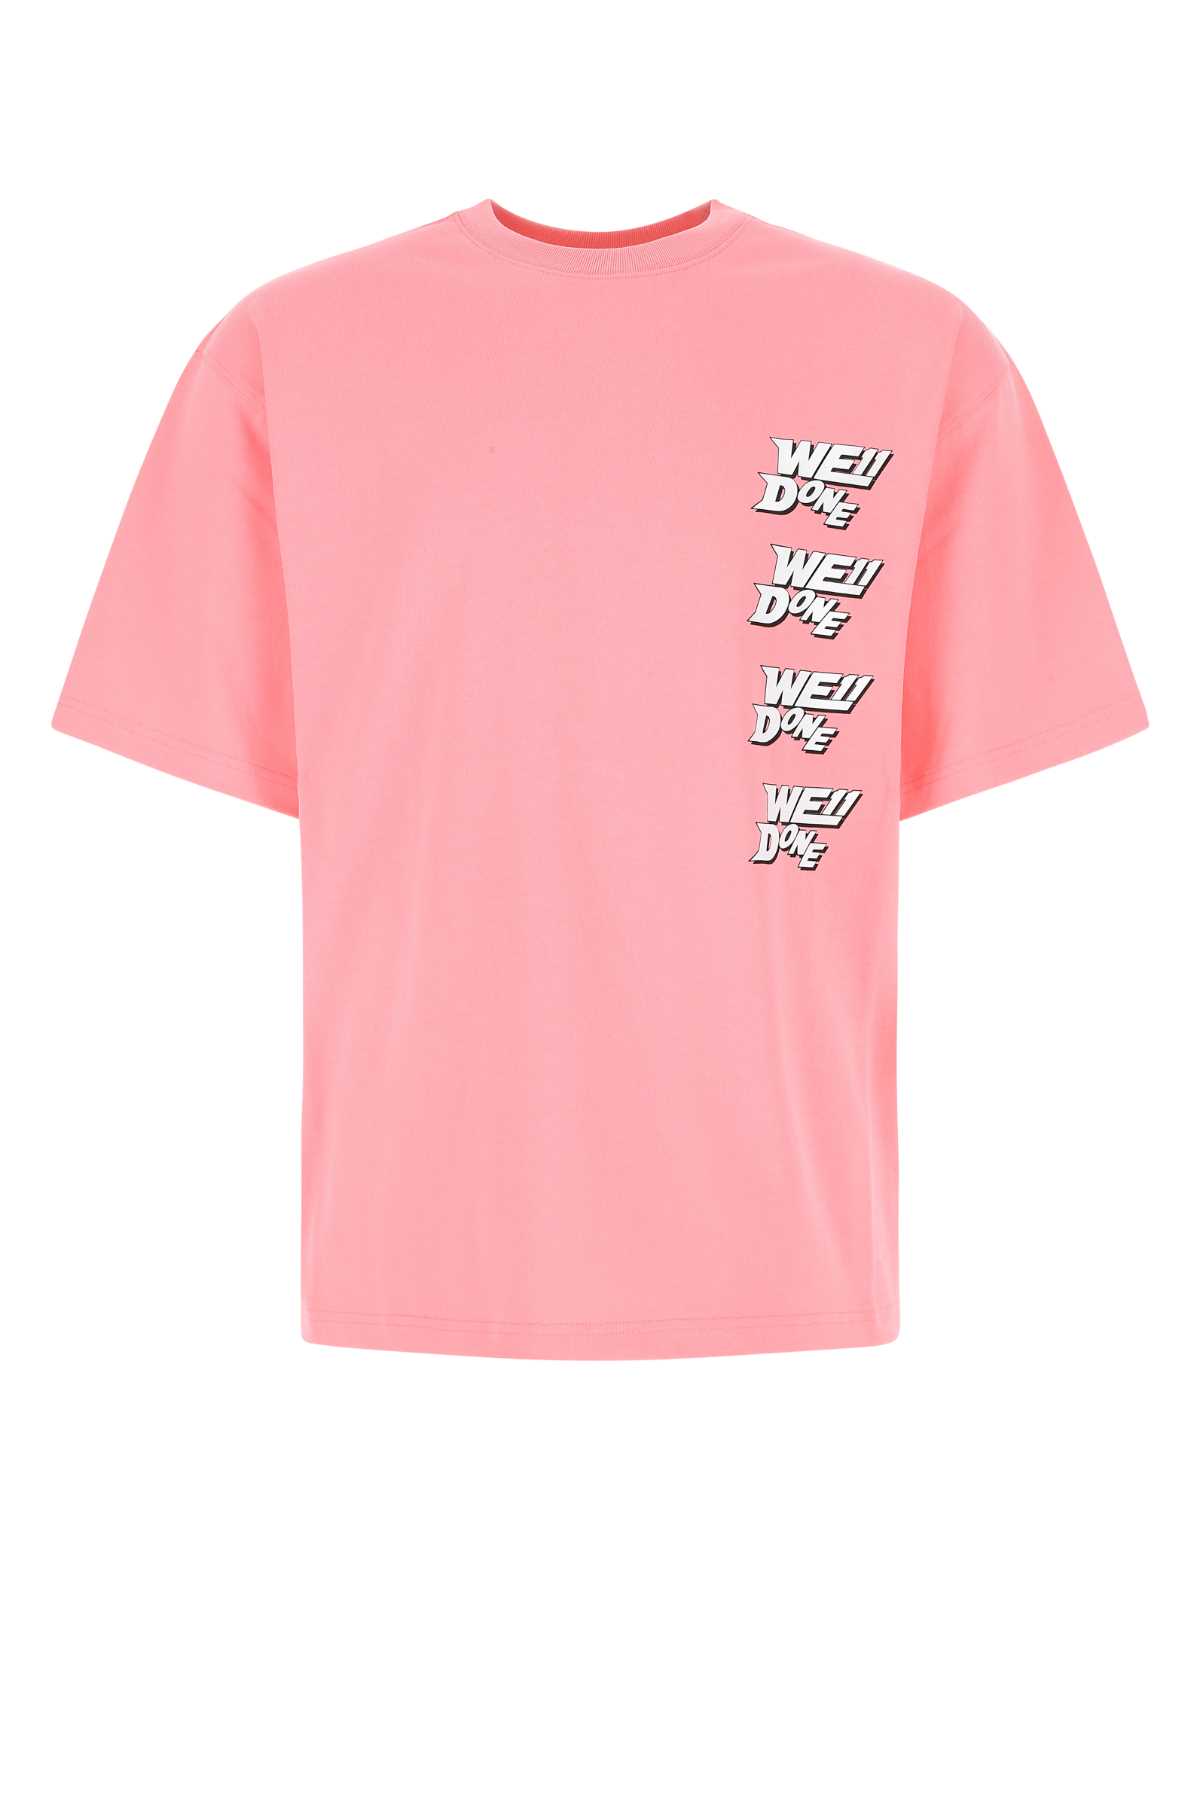 WE11 DONE Pink Cotton Oversize T-shirt